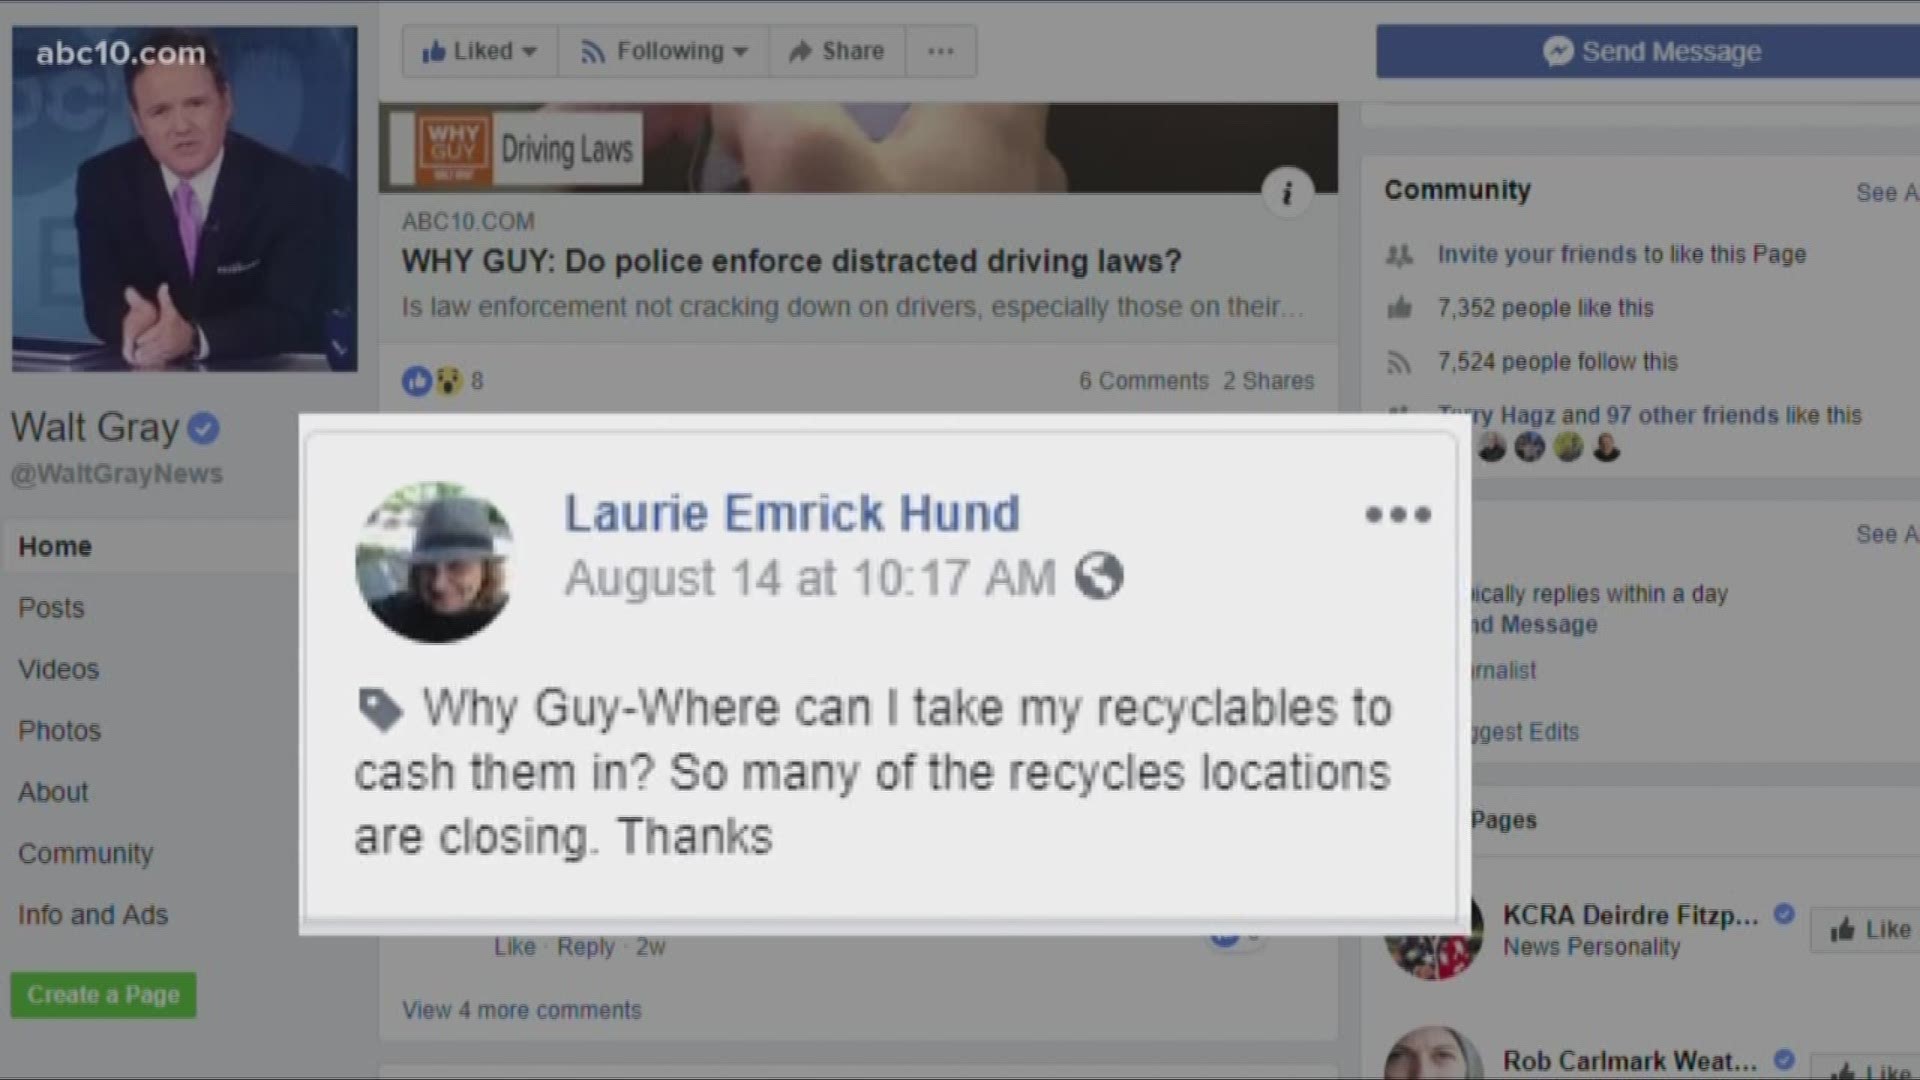 Why Guy tackles recycling after Laurie asks for help finding a place she can take her recyclables to cash them in.